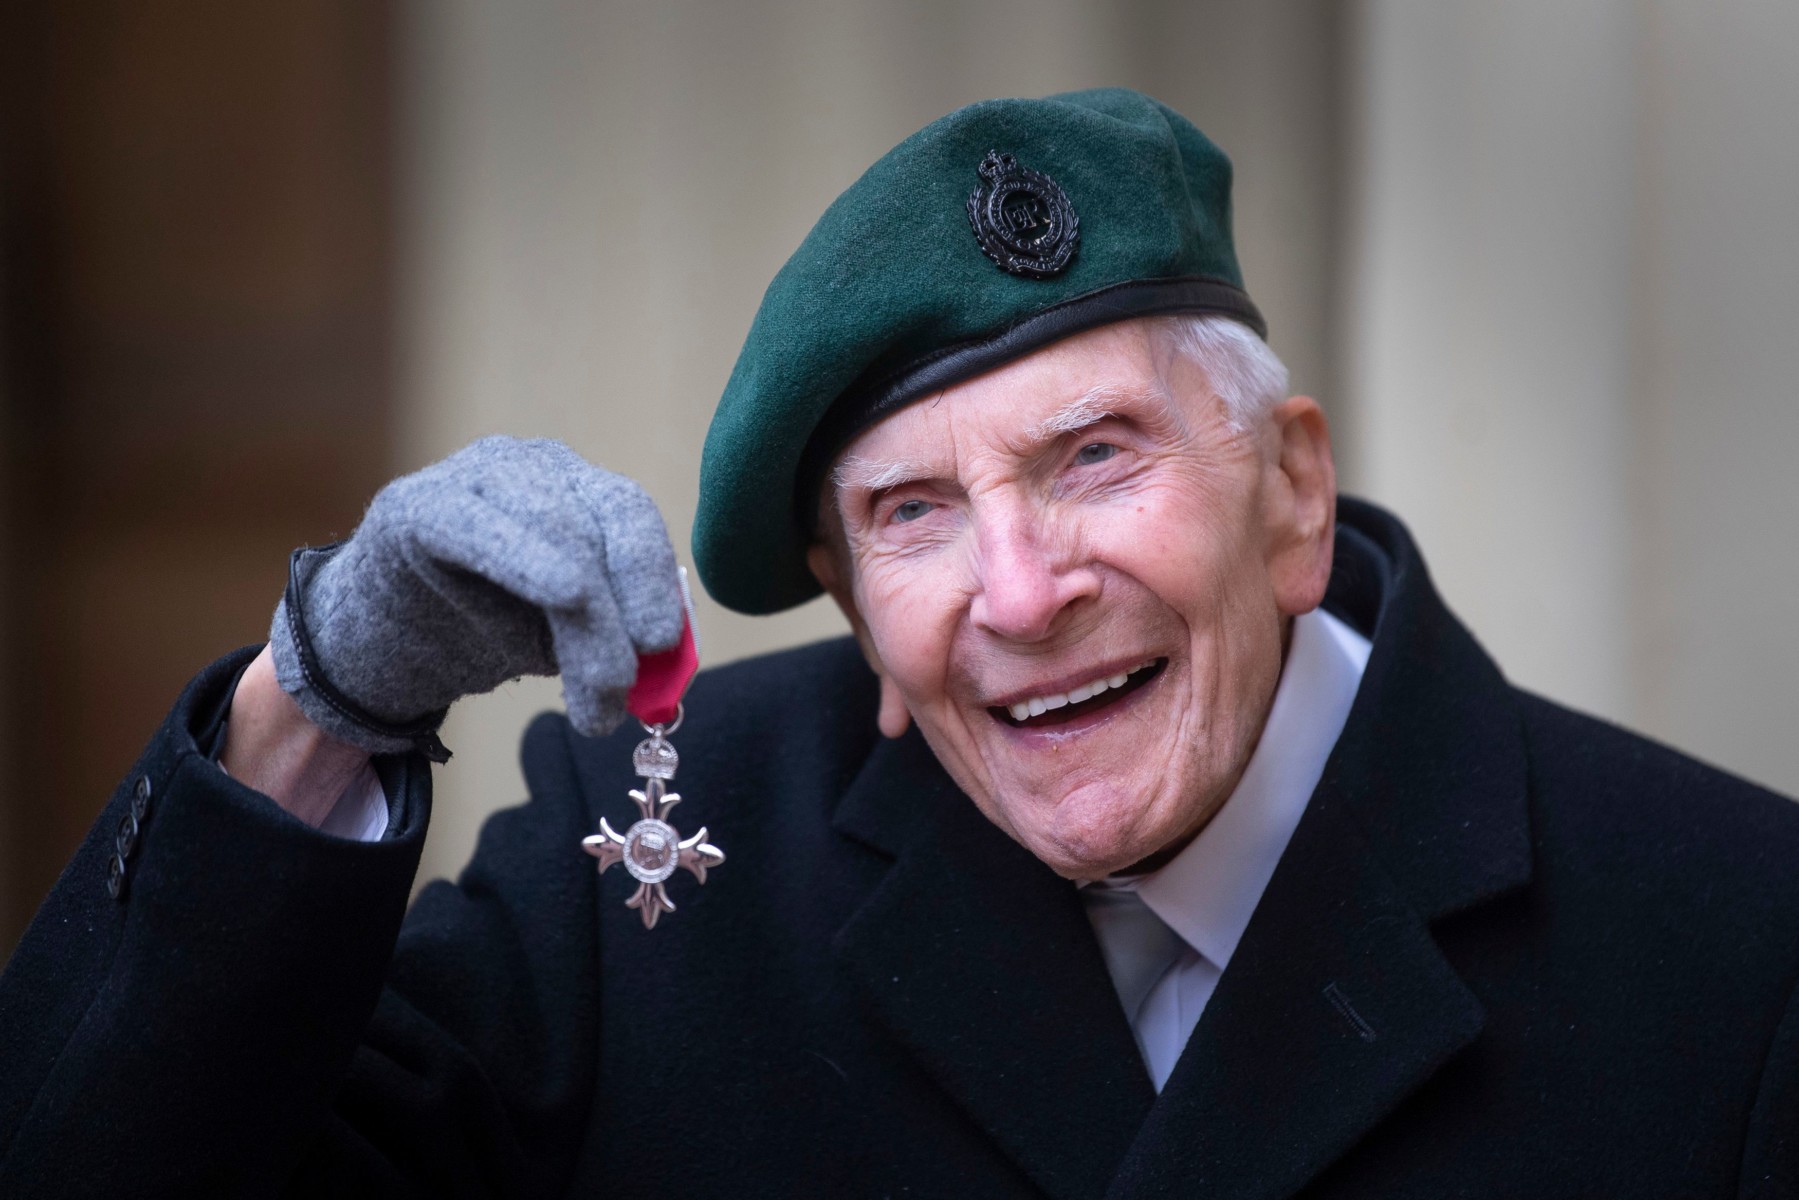 Harry has dedicated his MBE to the 22,442 comrades who were killed on D-Day